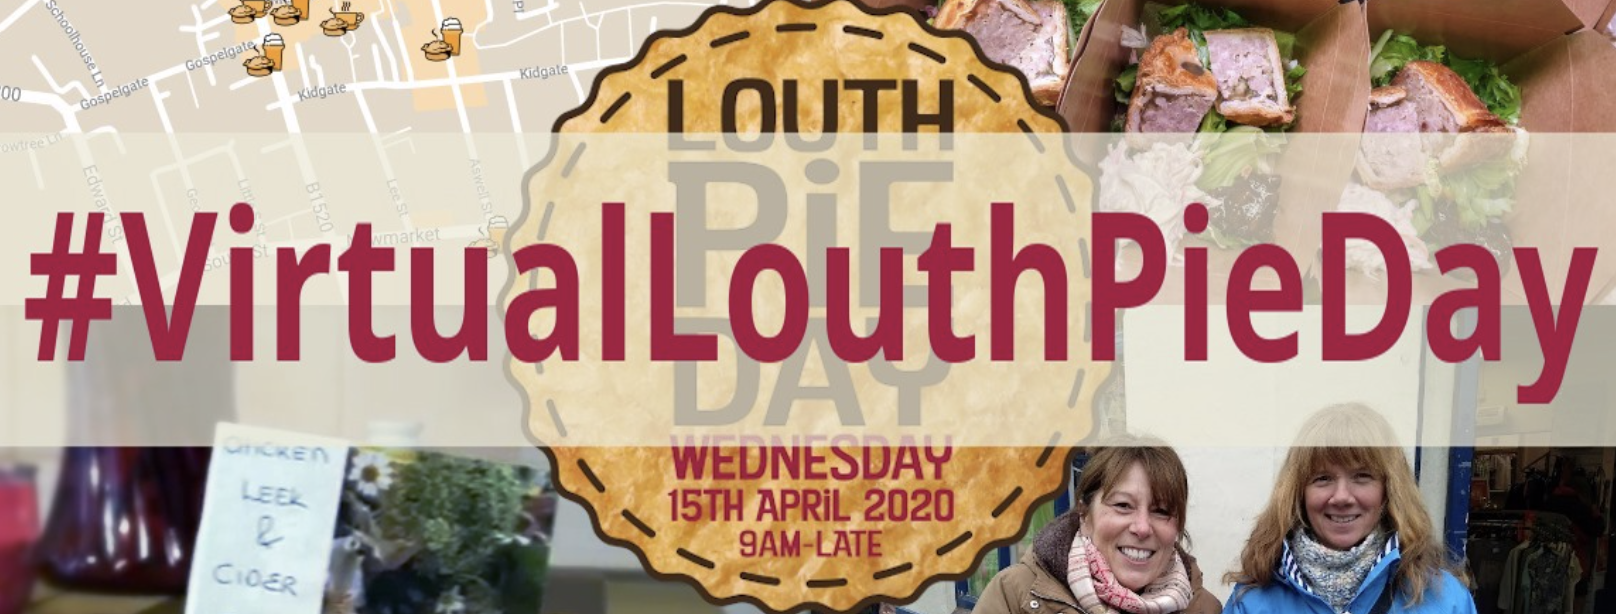 #WhatsOnLincs - Louth In Lincolnshire by LincsConnect - Louth Pie Day